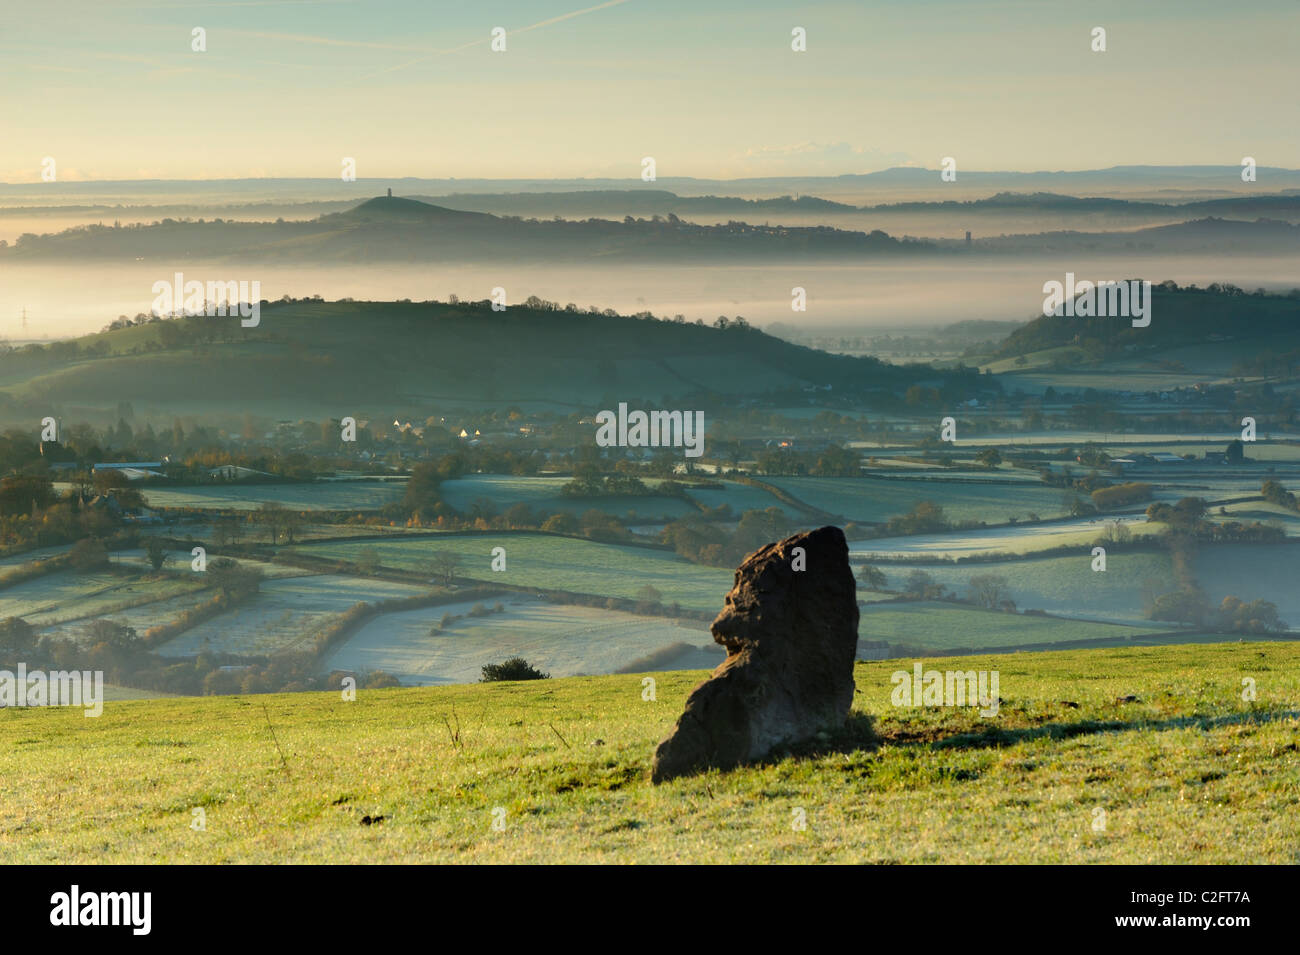 An ancient standing stone on the Mendip Hills overlooking a mist scene on the Somerset Levels. Stock Photo